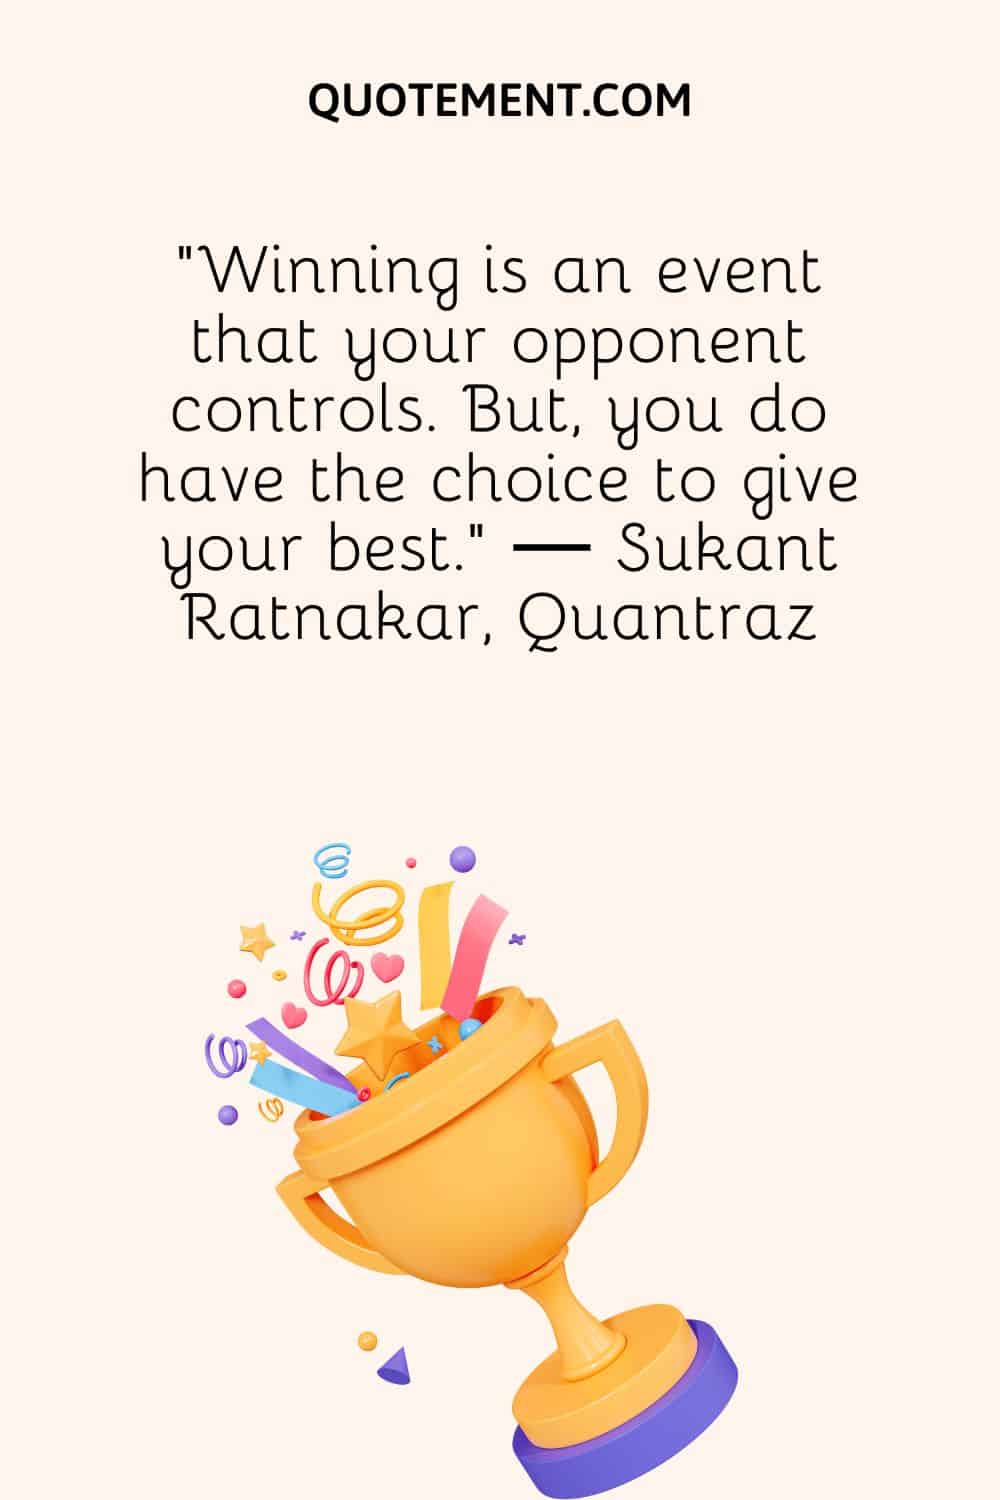 “Winning is an event that your opponent controls. But, you do have the choice to give your best.” ― Sukant Ratnakar, Quantraz